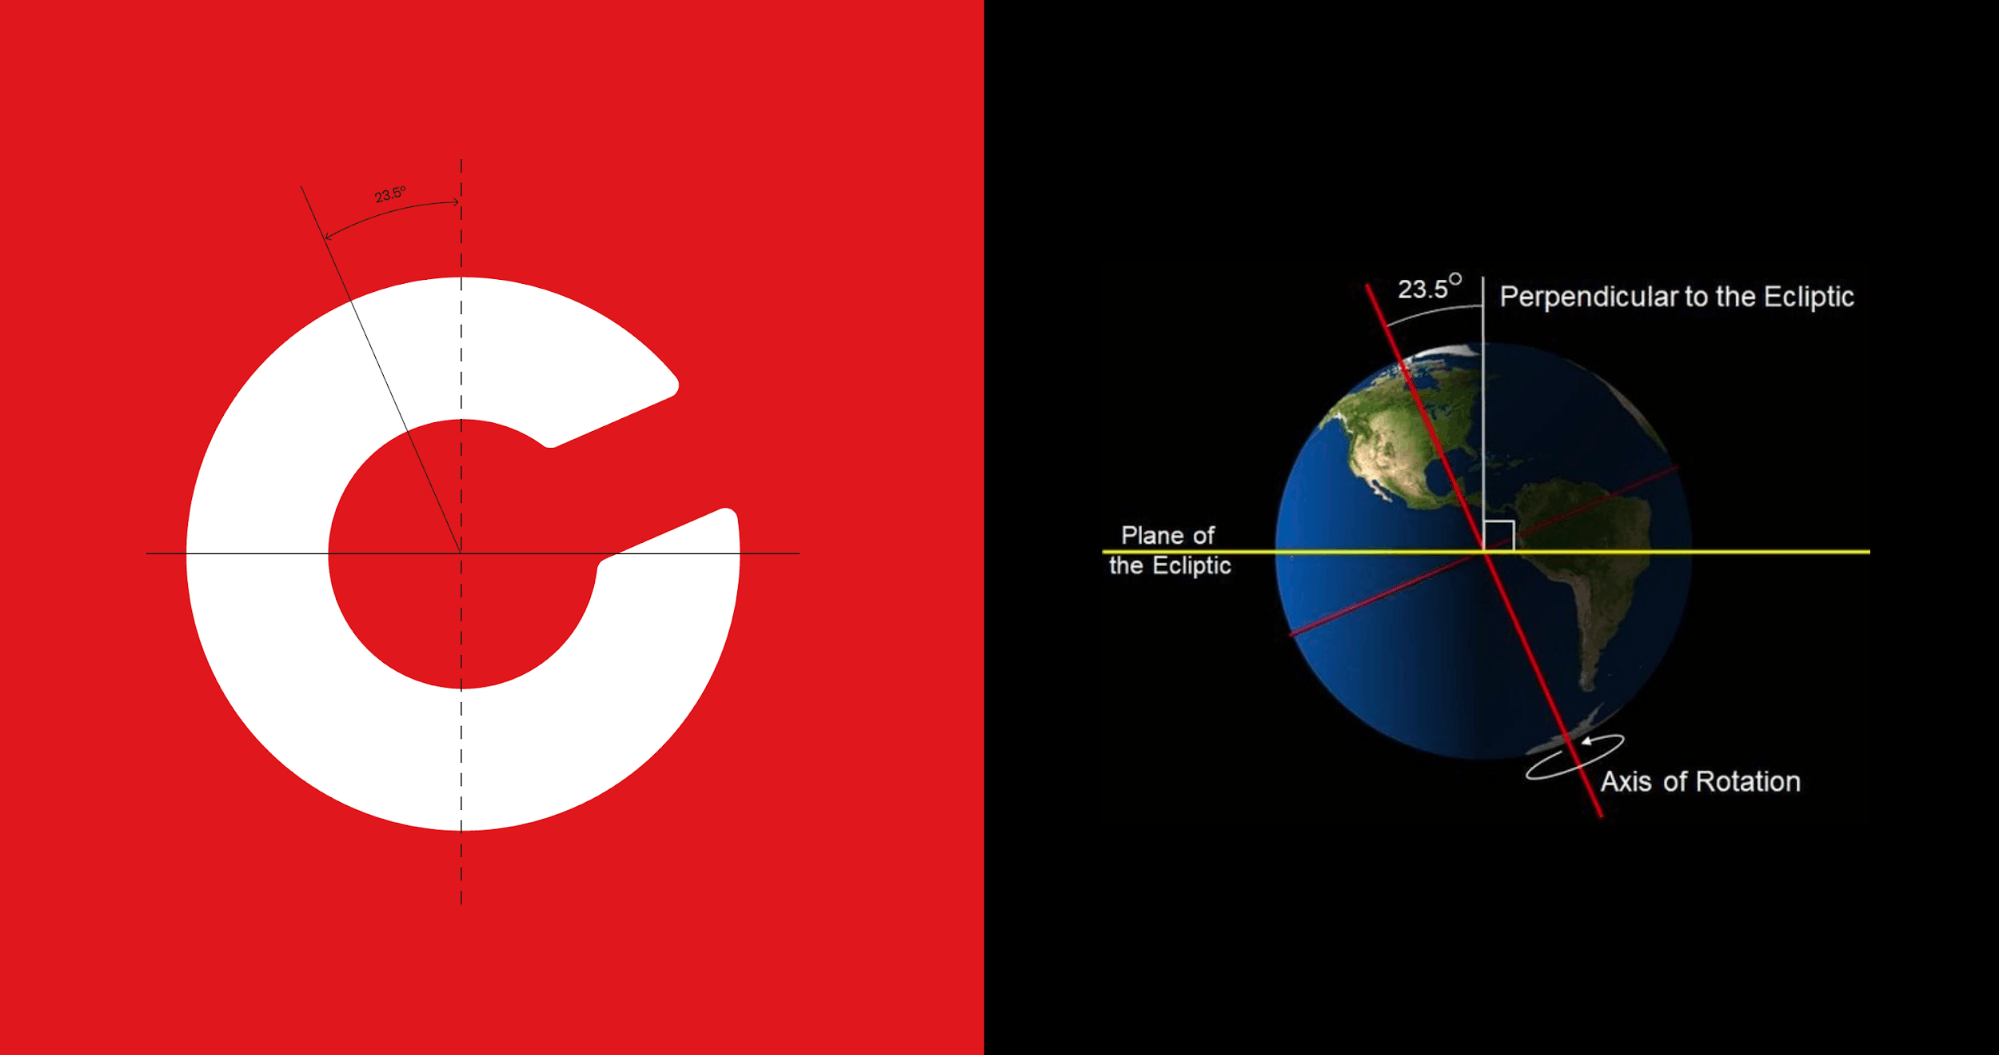 The tilt of the ‘C’ is the same angle as the tilt of the Earth.